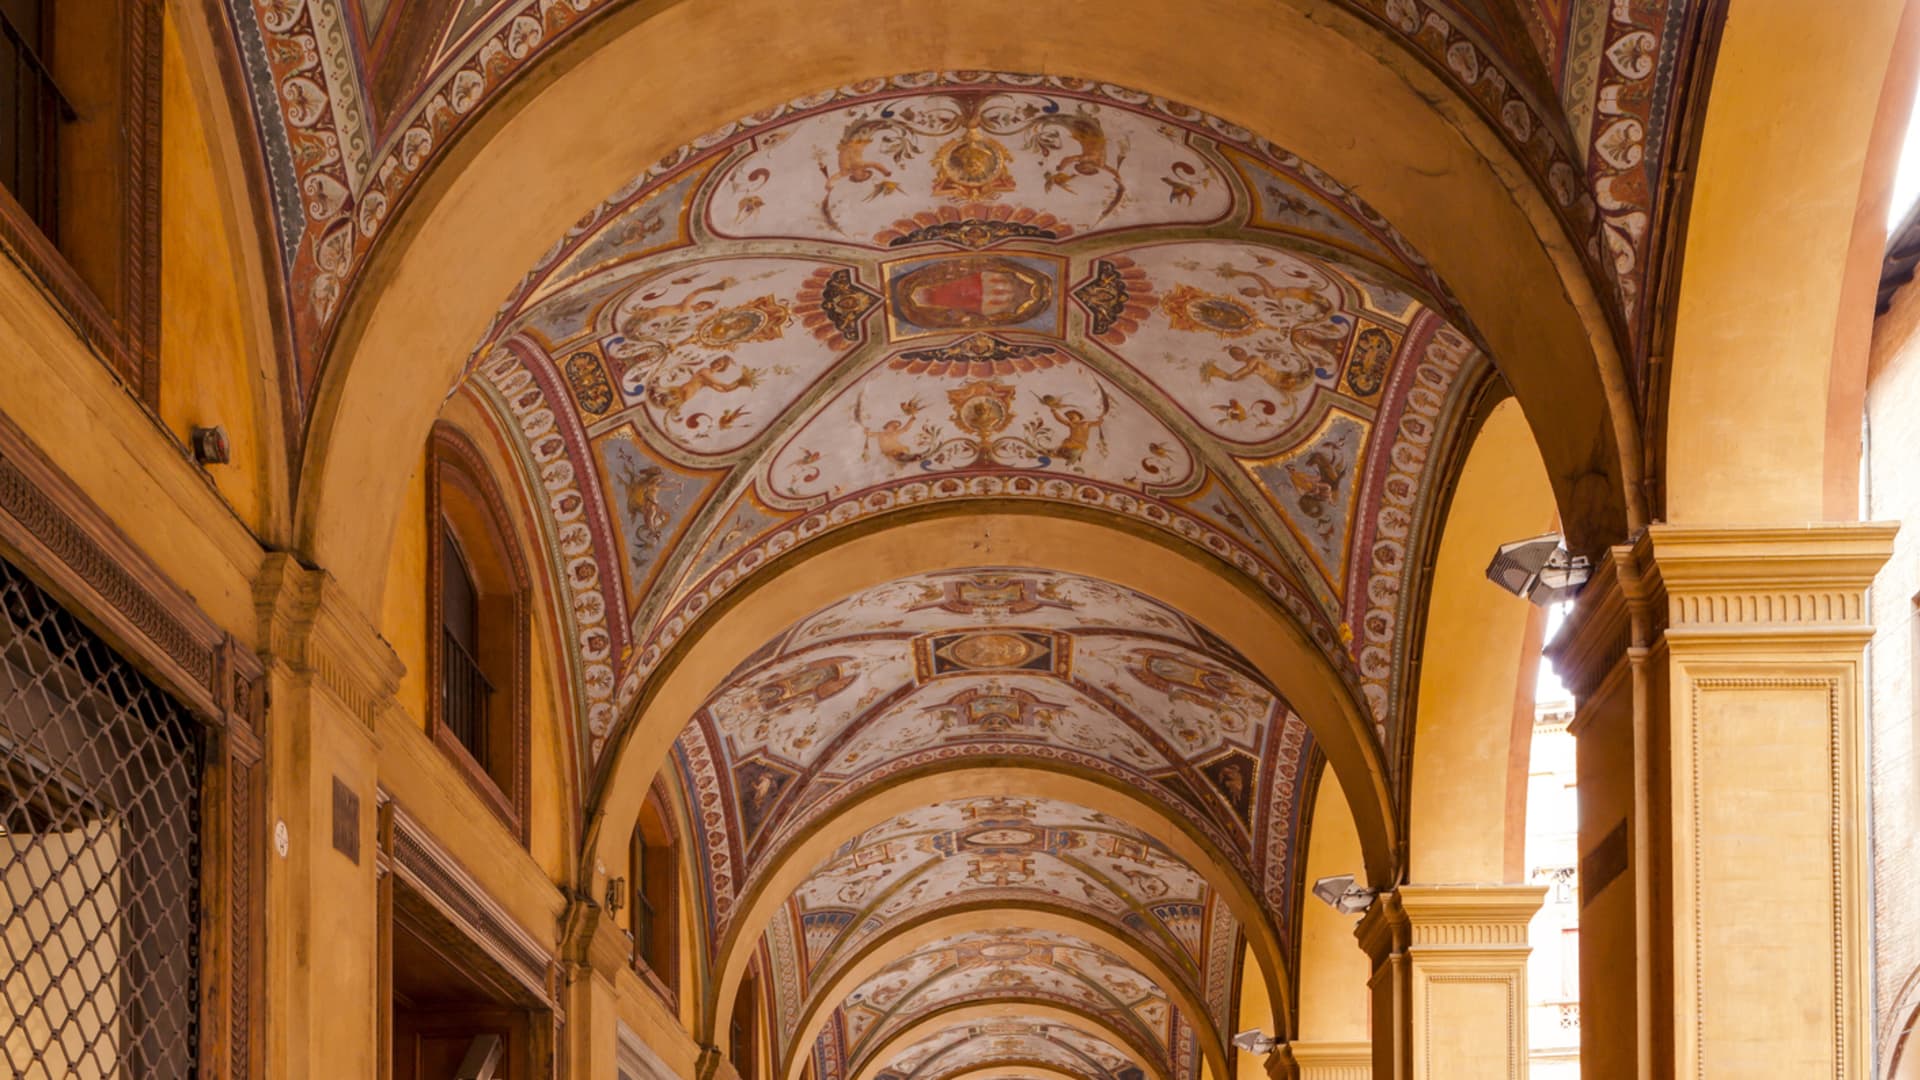 The porticoes of Bologna are often covered in decorative tiles or paintings.